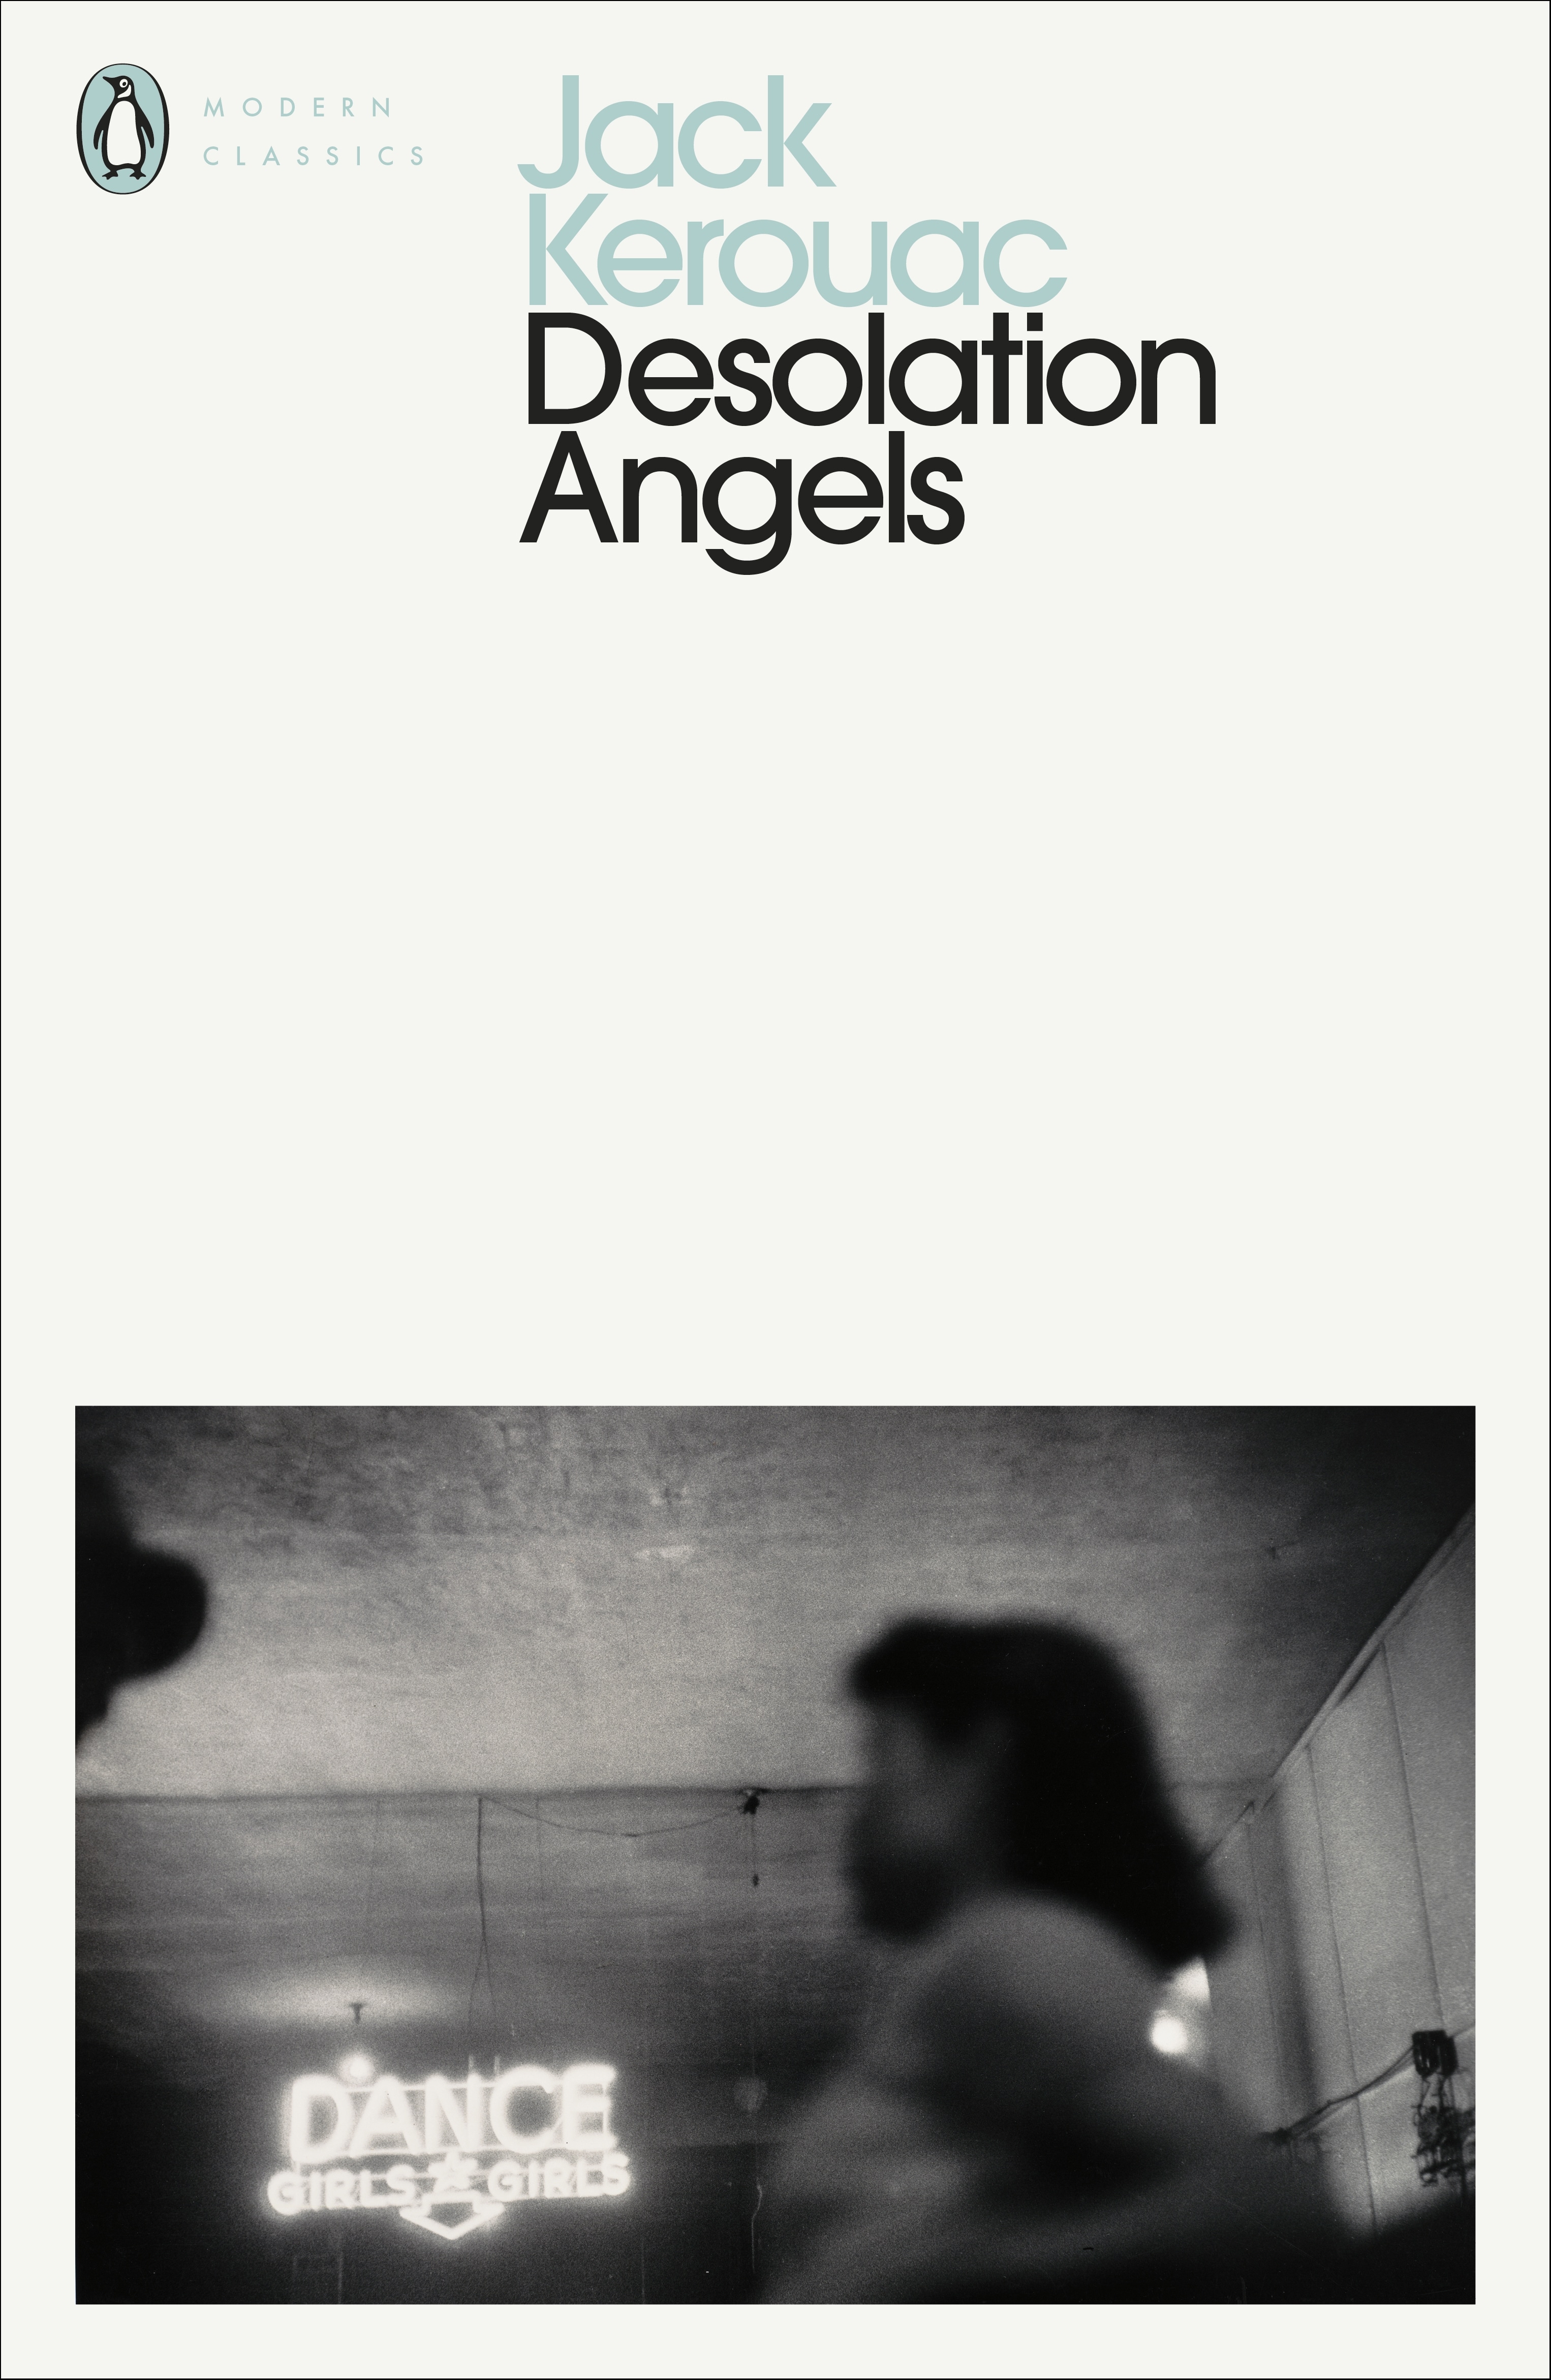 Book “Desolation Angels” by Jack Kerouac — May 3, 2012